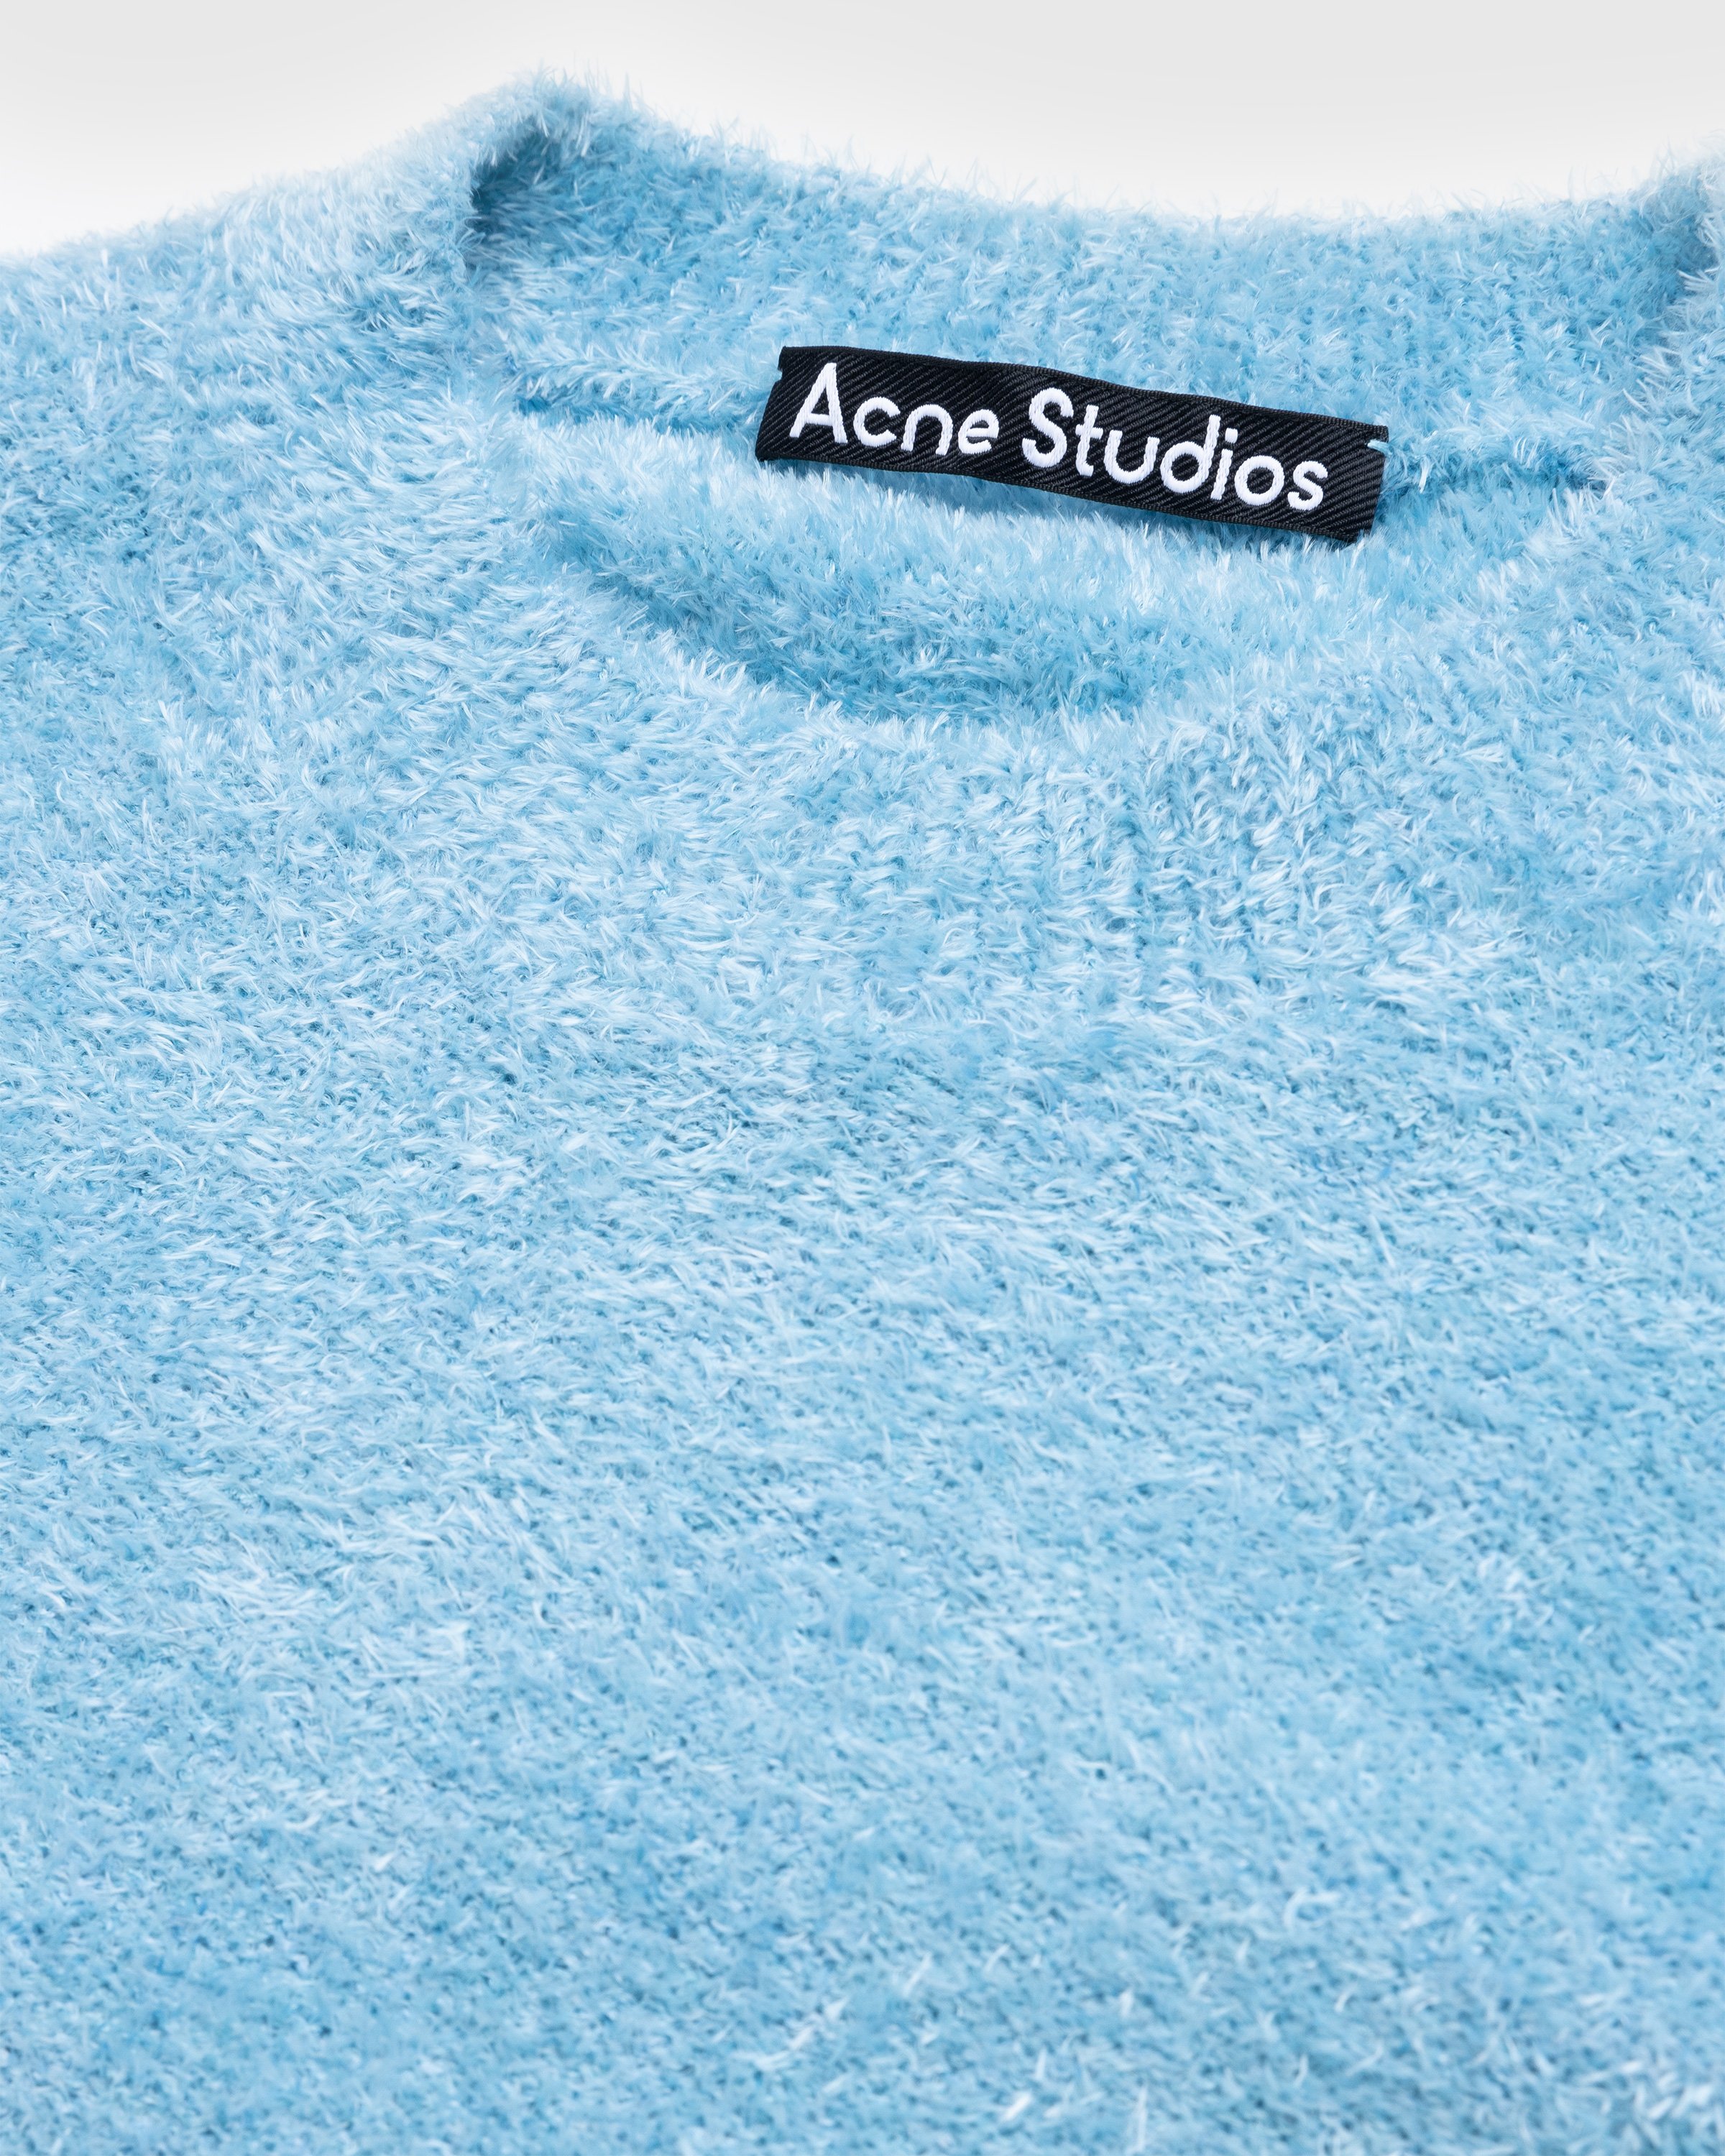 Acne Studios - Textured Sweater Teal Blue - Clothing - Blue - Image 5